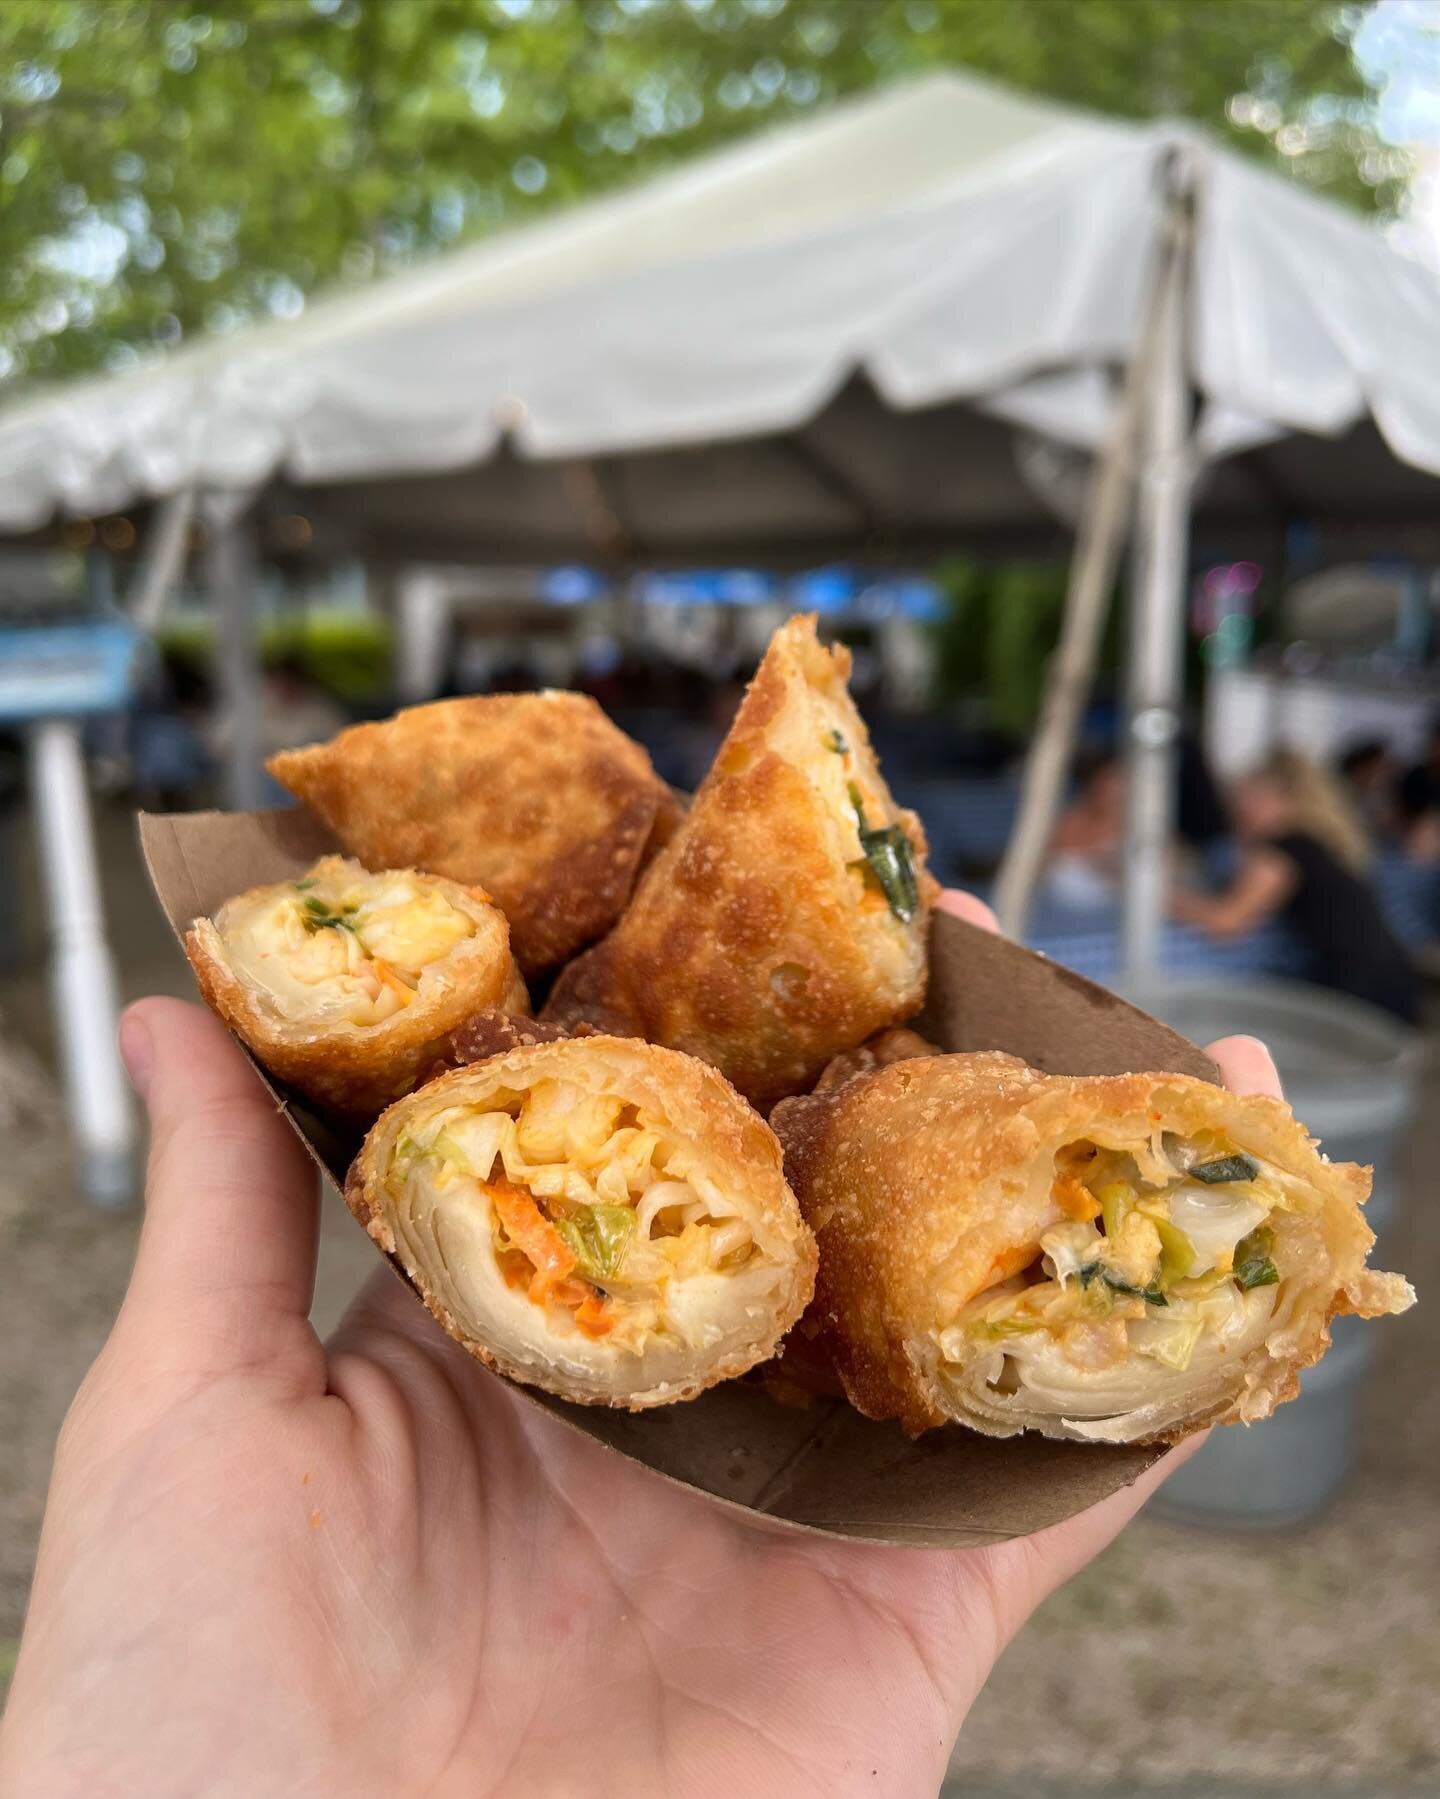 Todays special! BANGIN SHRIMP 🍤 🍤 

Find us at the Sips &amp; Bits booth at the Devon Horse Show thru Sunday! We&rsquo;ll also be at @amblerfarmersmarket &amp; @phoenixvillefarmersmarket this Saturday from 9-12.

#MadisOnARoll #WeWantMOAR #MOAR #eg